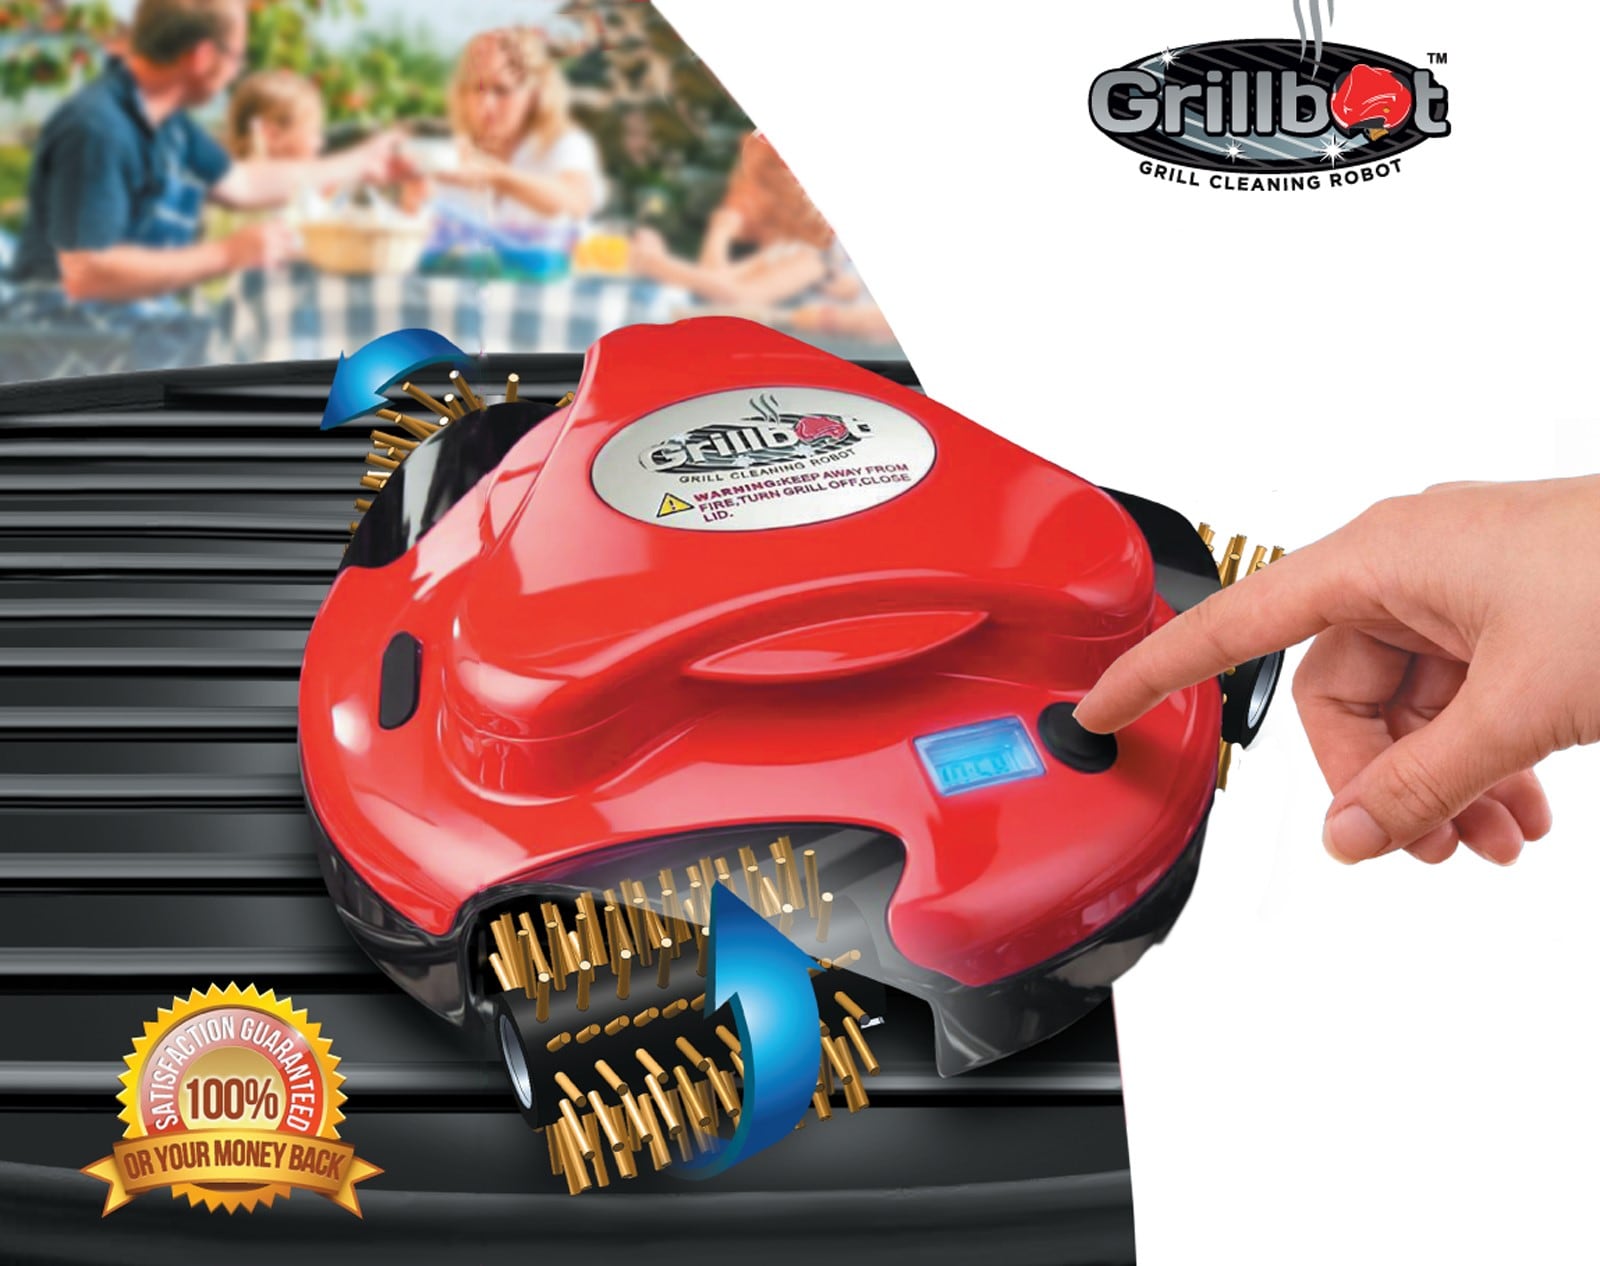 Does It Work? Grillbot Automatic Grill Cleaning Robot